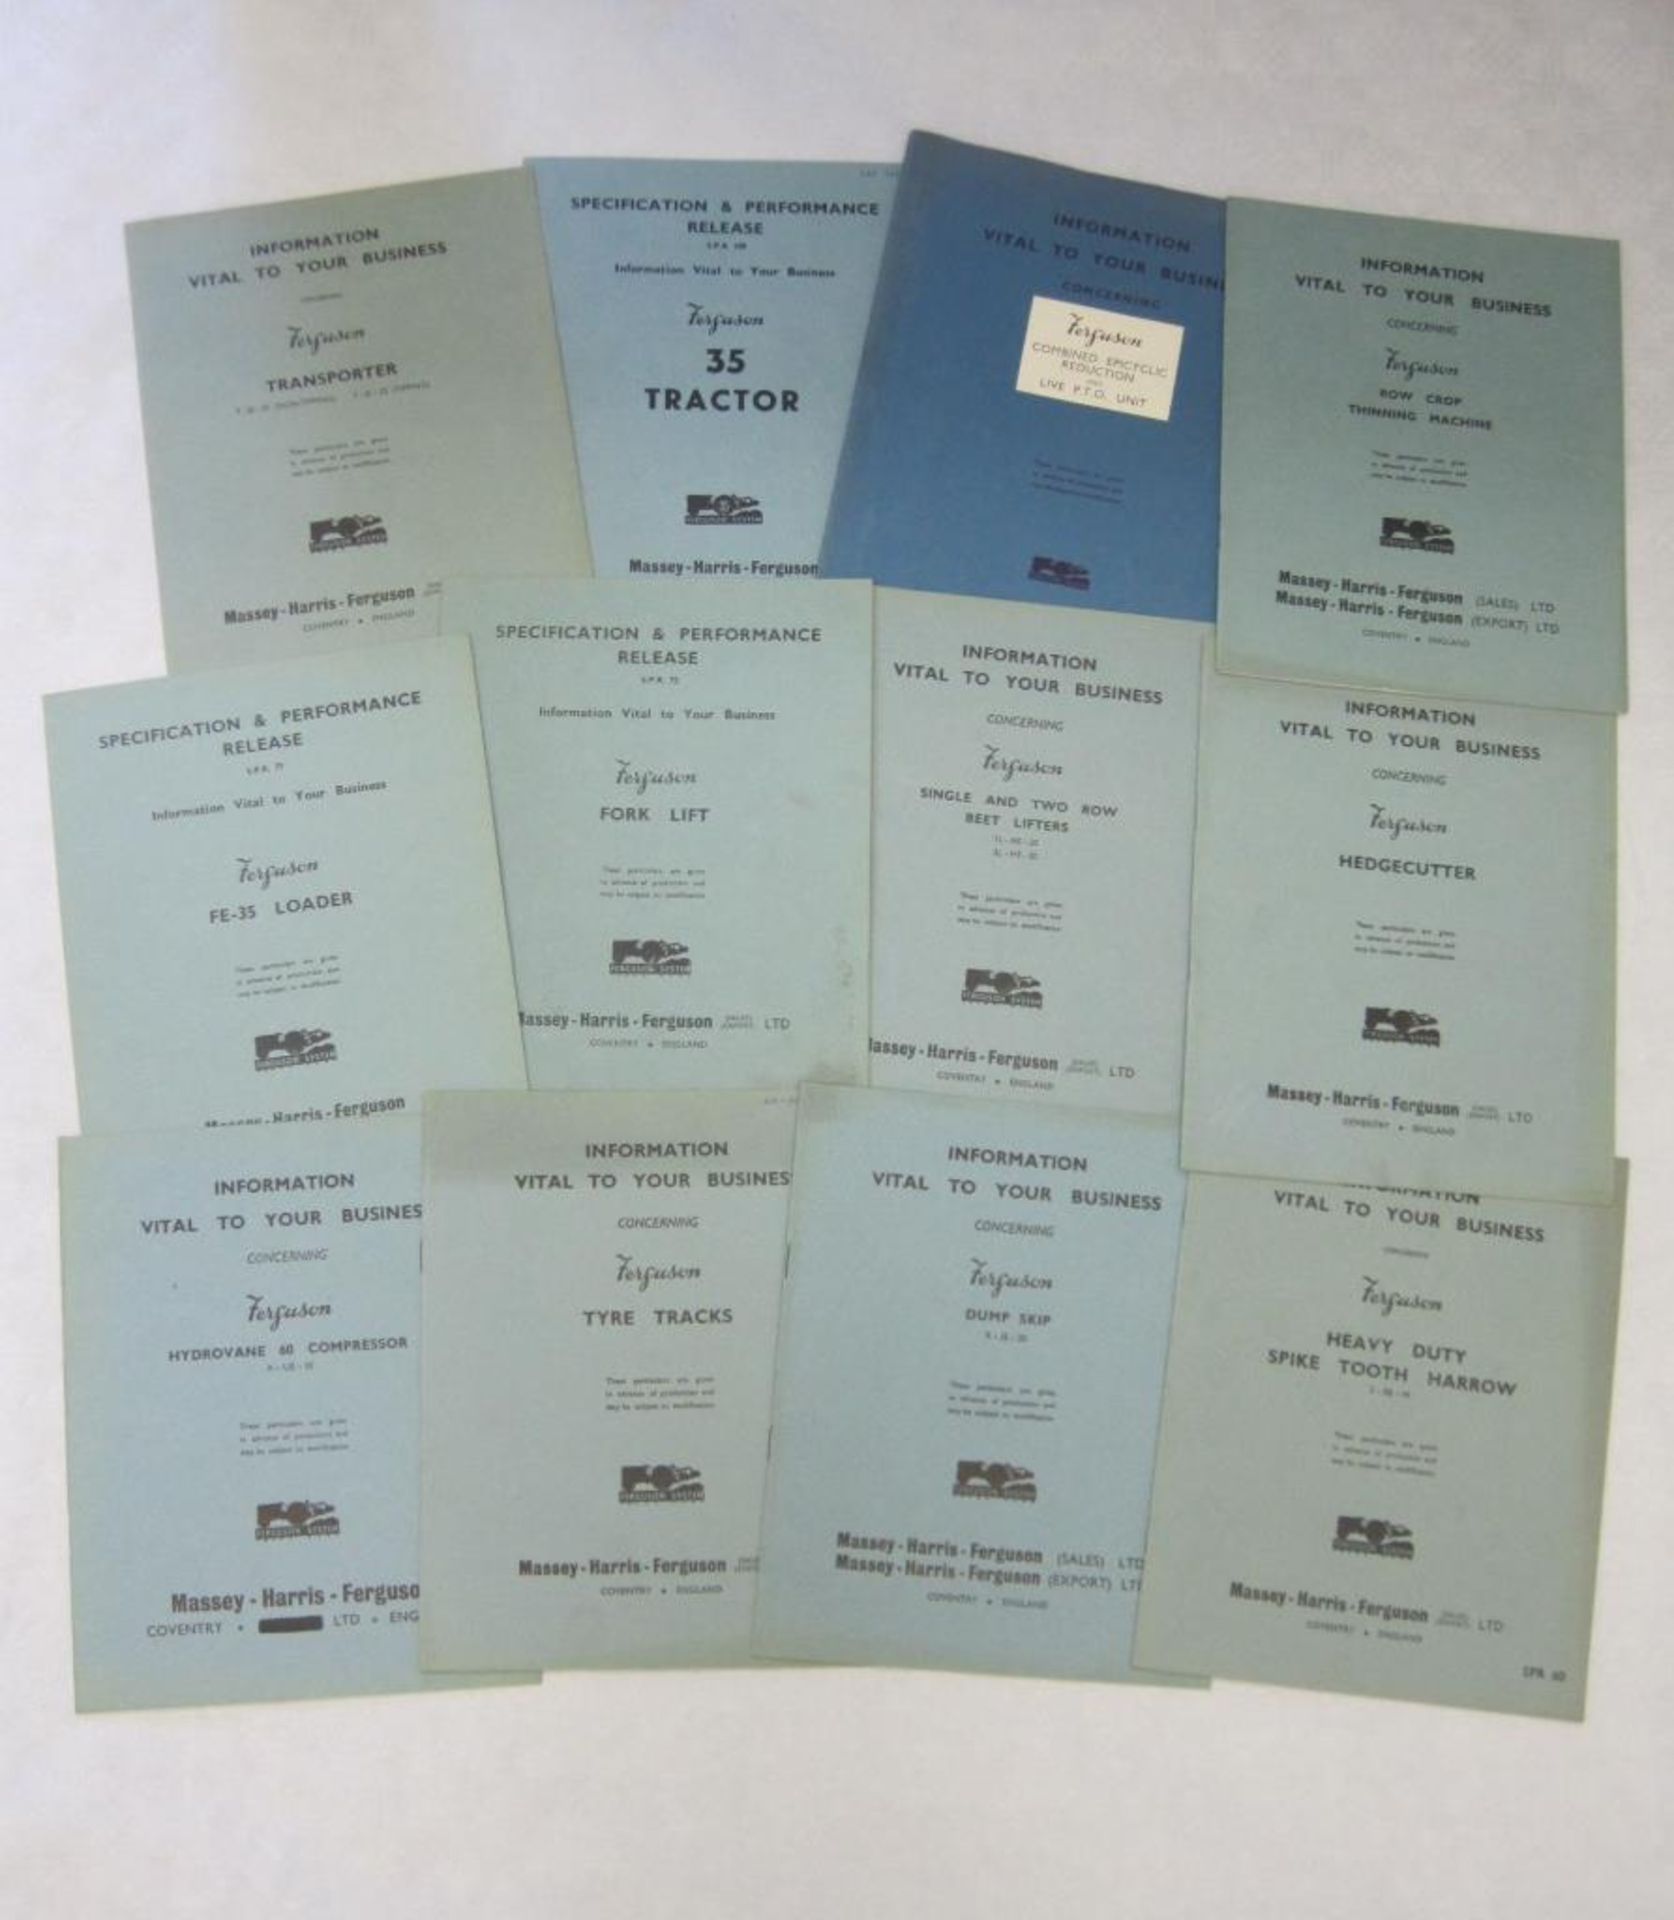 Massey-Harris Ferguson pre-production information booklets covering 35 tractor and many implements